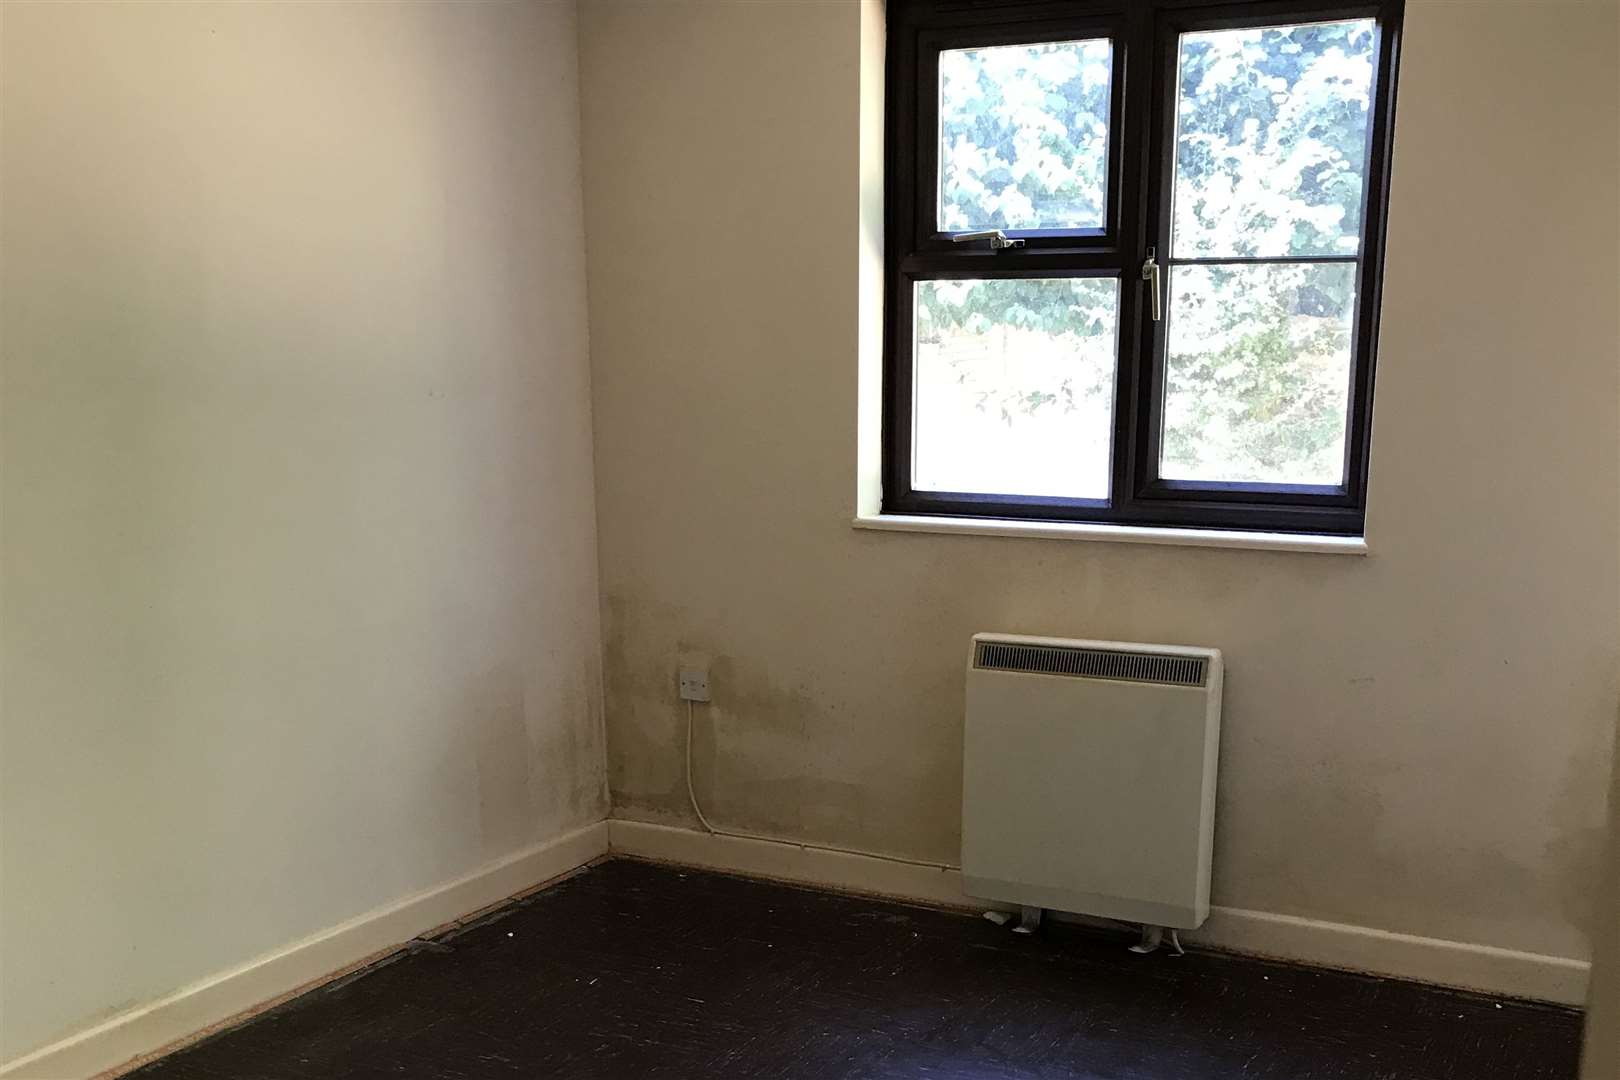 The flat on Downland Court had no flooring and damp marks on the wall when Barbara Hasiuk first moved in